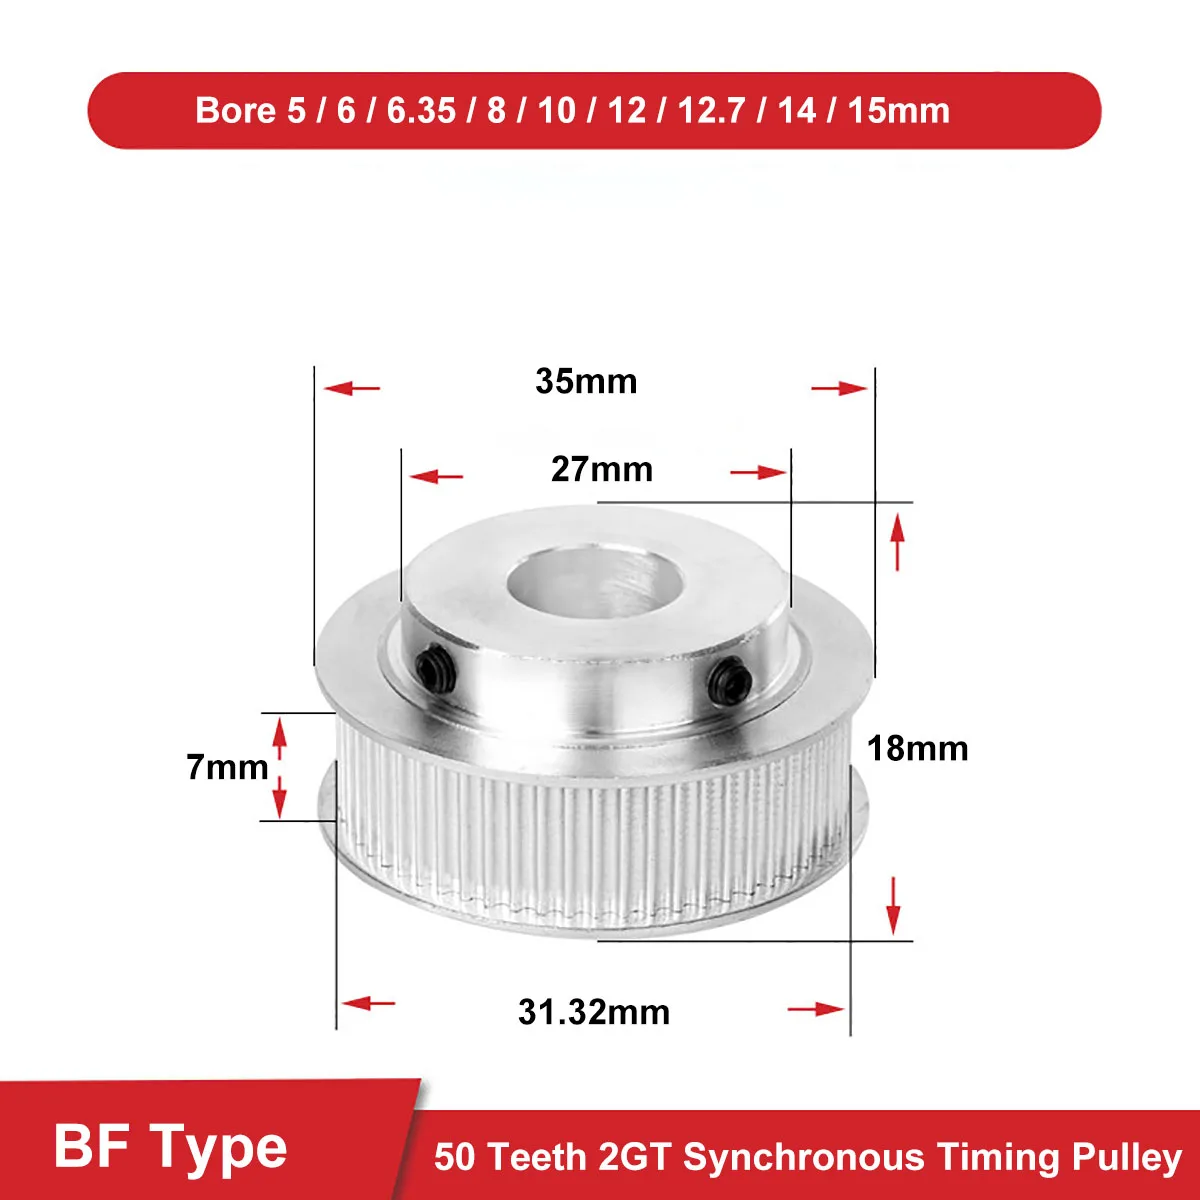 

BF 50Teeth 2GT Synchronous Timing Pulley Bore 5/6/6.35/8/10/12/12.7/14/15mm Aluminium Idler Pulley For 6mm Width 2GT Timing Belt